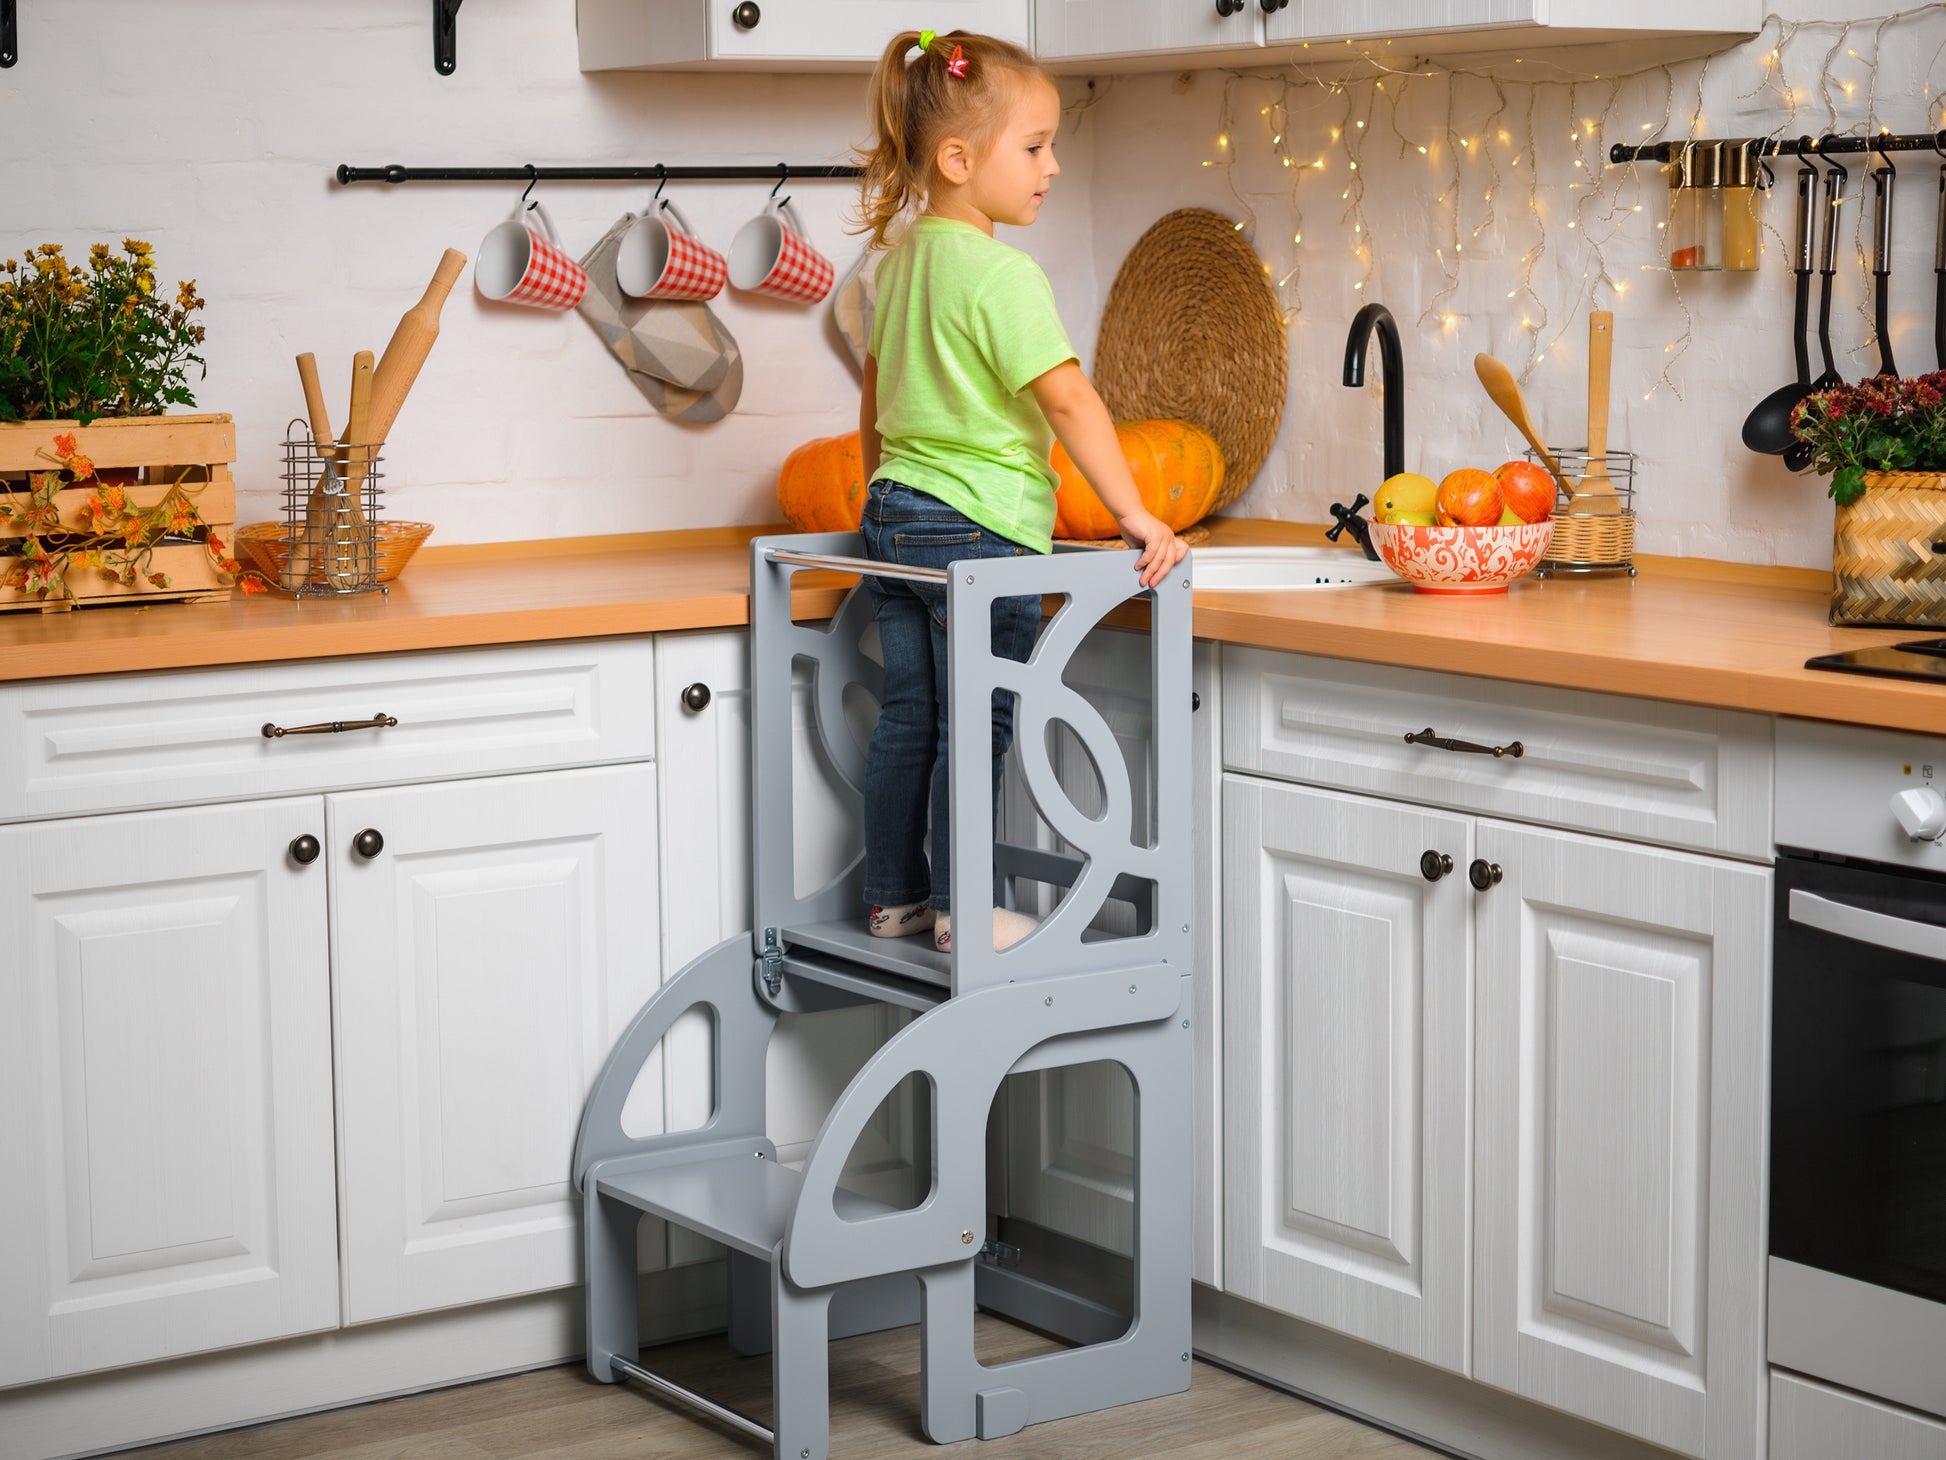 BROWN Learning Convertible tower & table, kitchen step stool - Climbambino